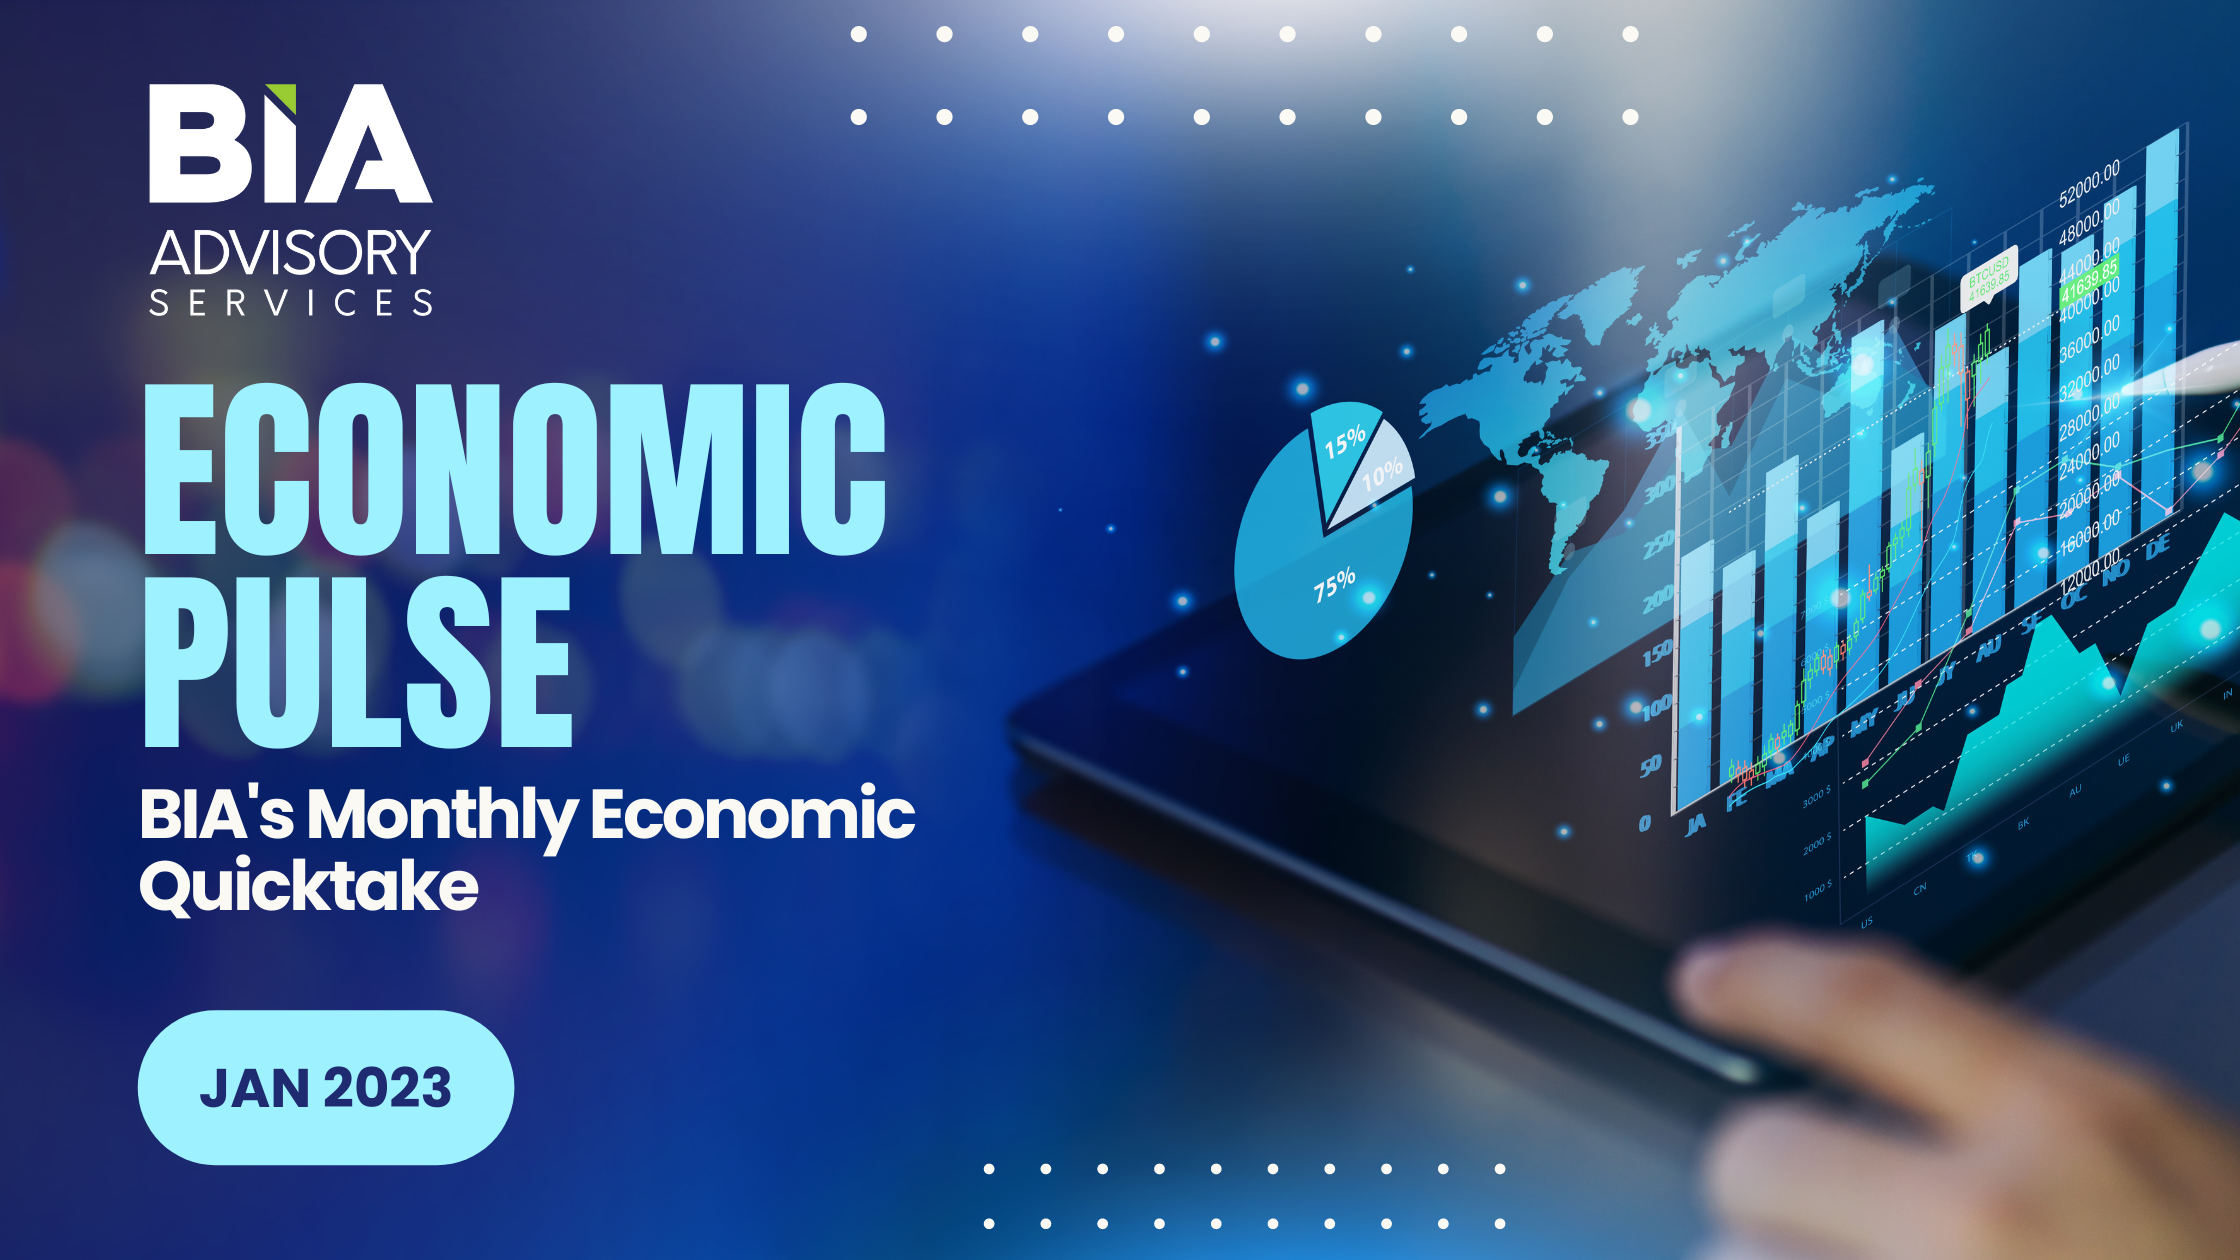 Economic Pulse: BIA’s Monthly Quicktake For January 2023